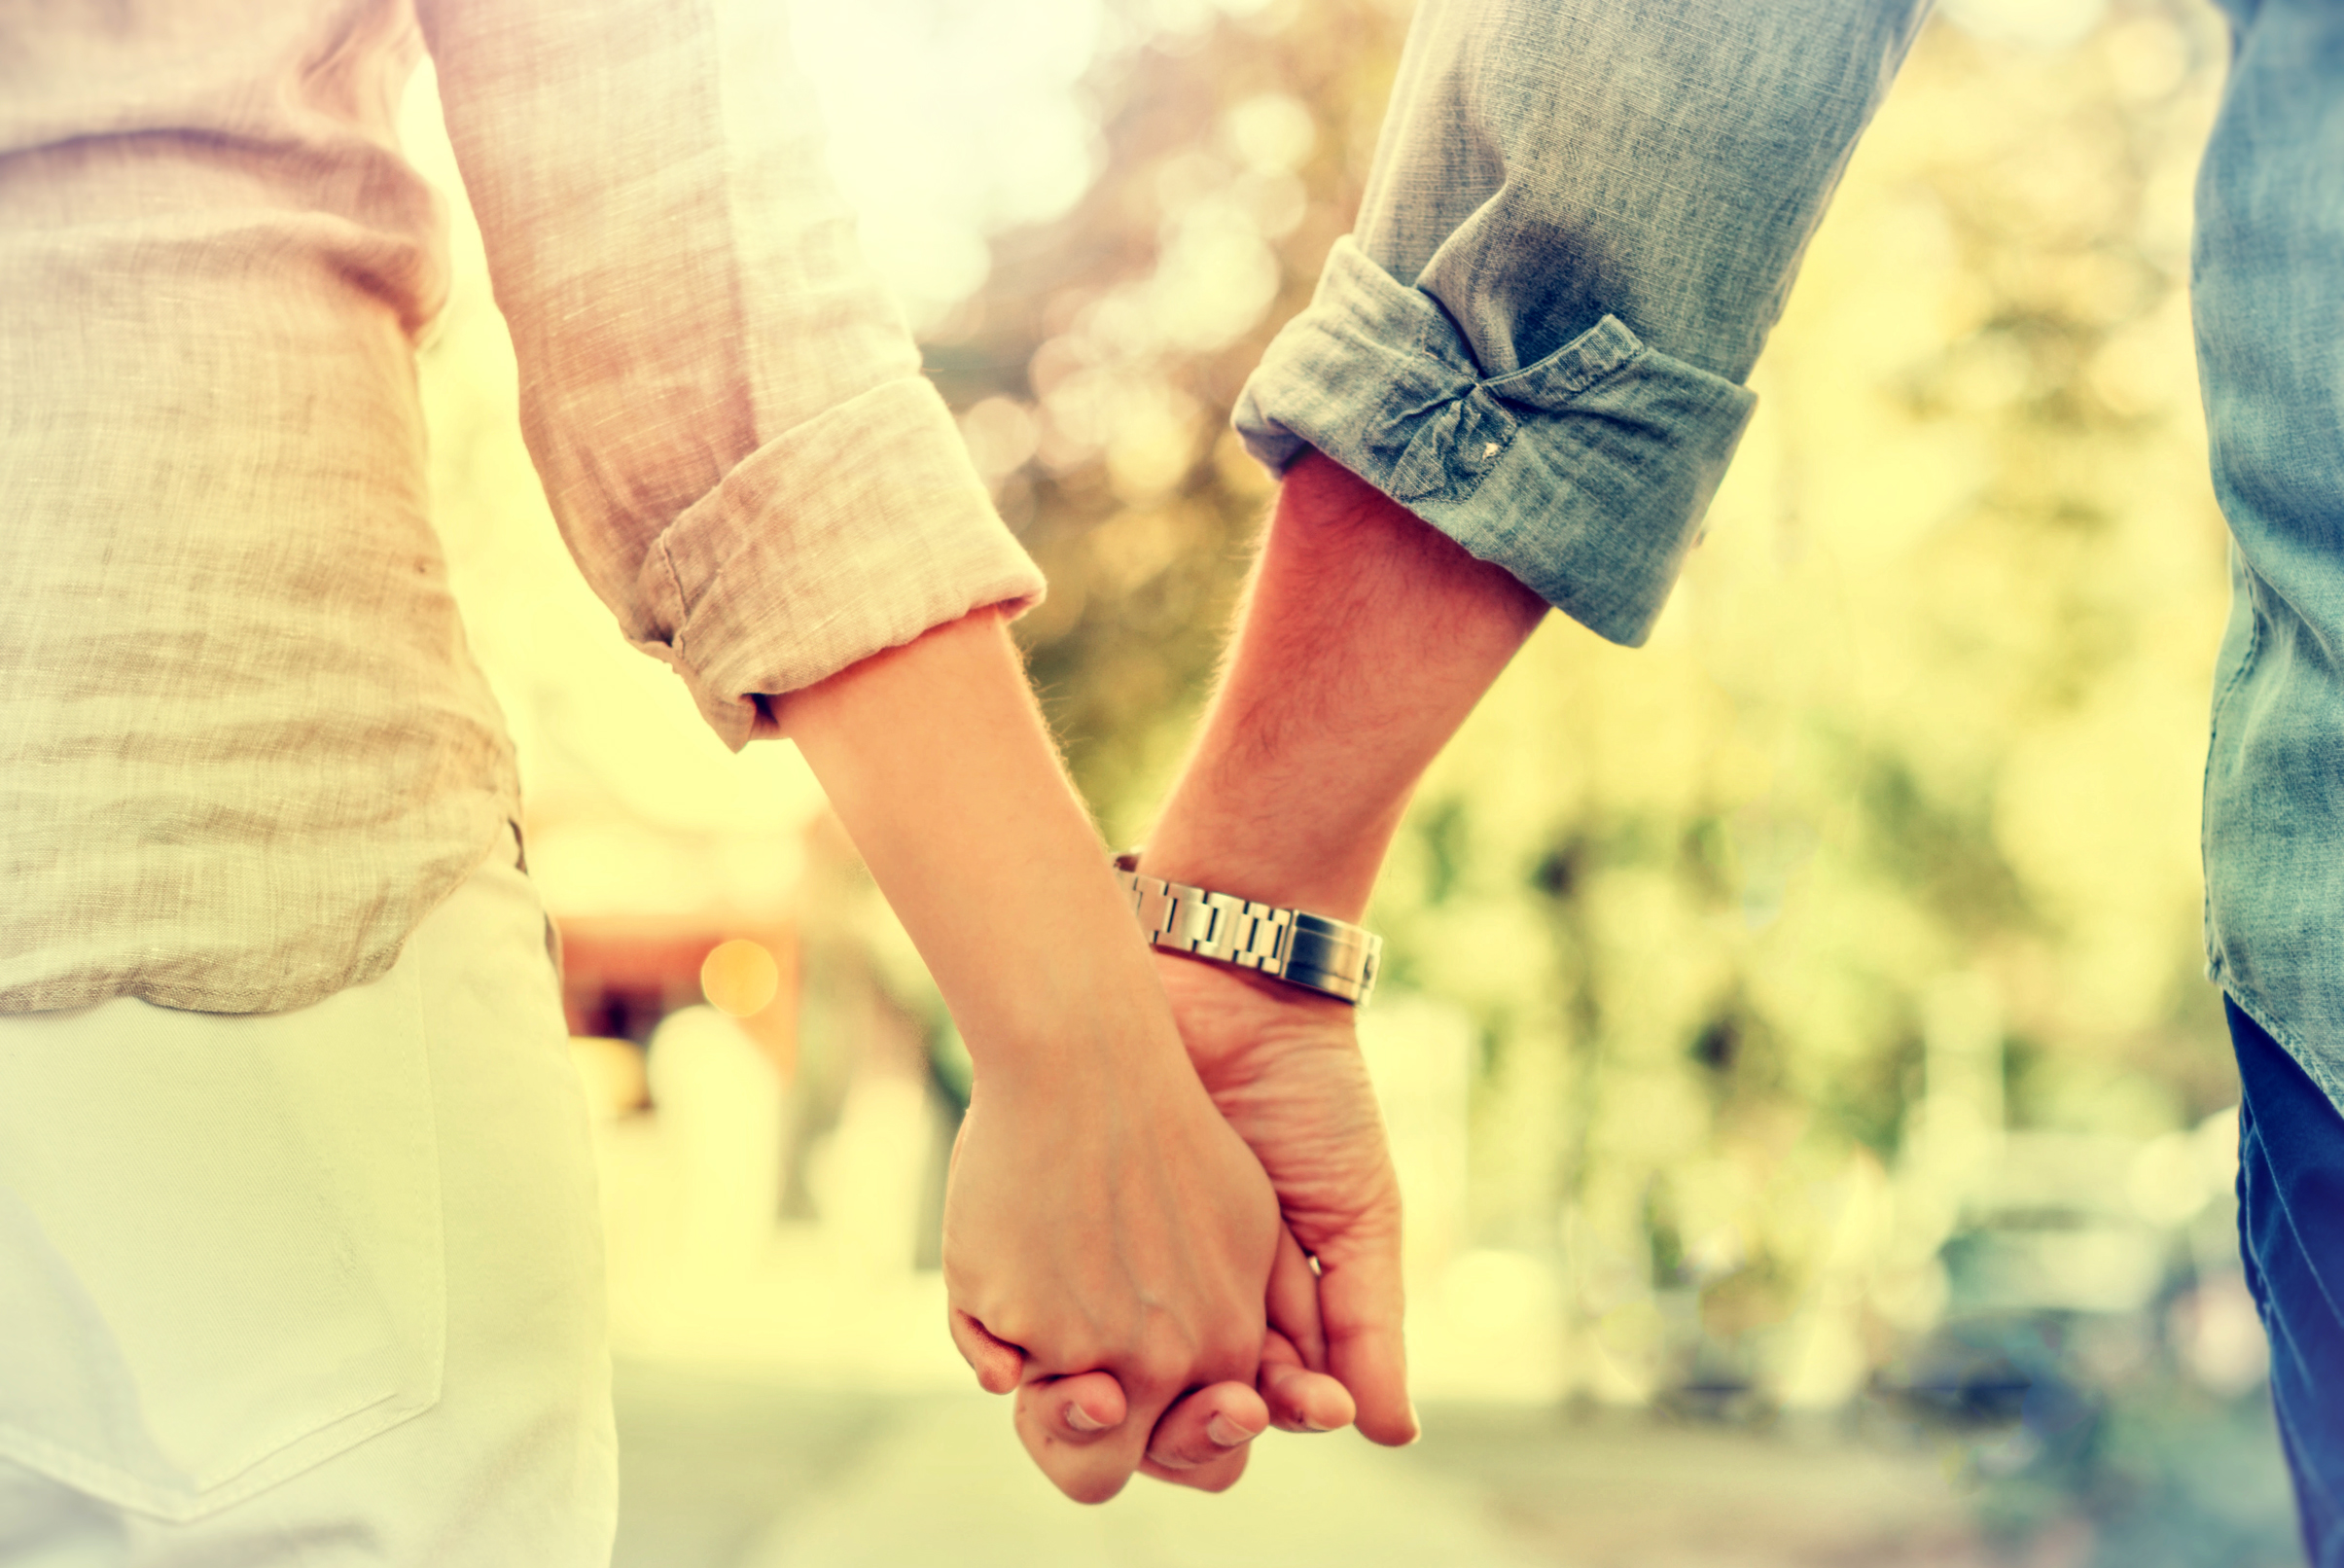 Hazy Vintage Looks - Couple Walking Hand in Hand, Action, Pair, Relationship, Portrait, HQ Photo